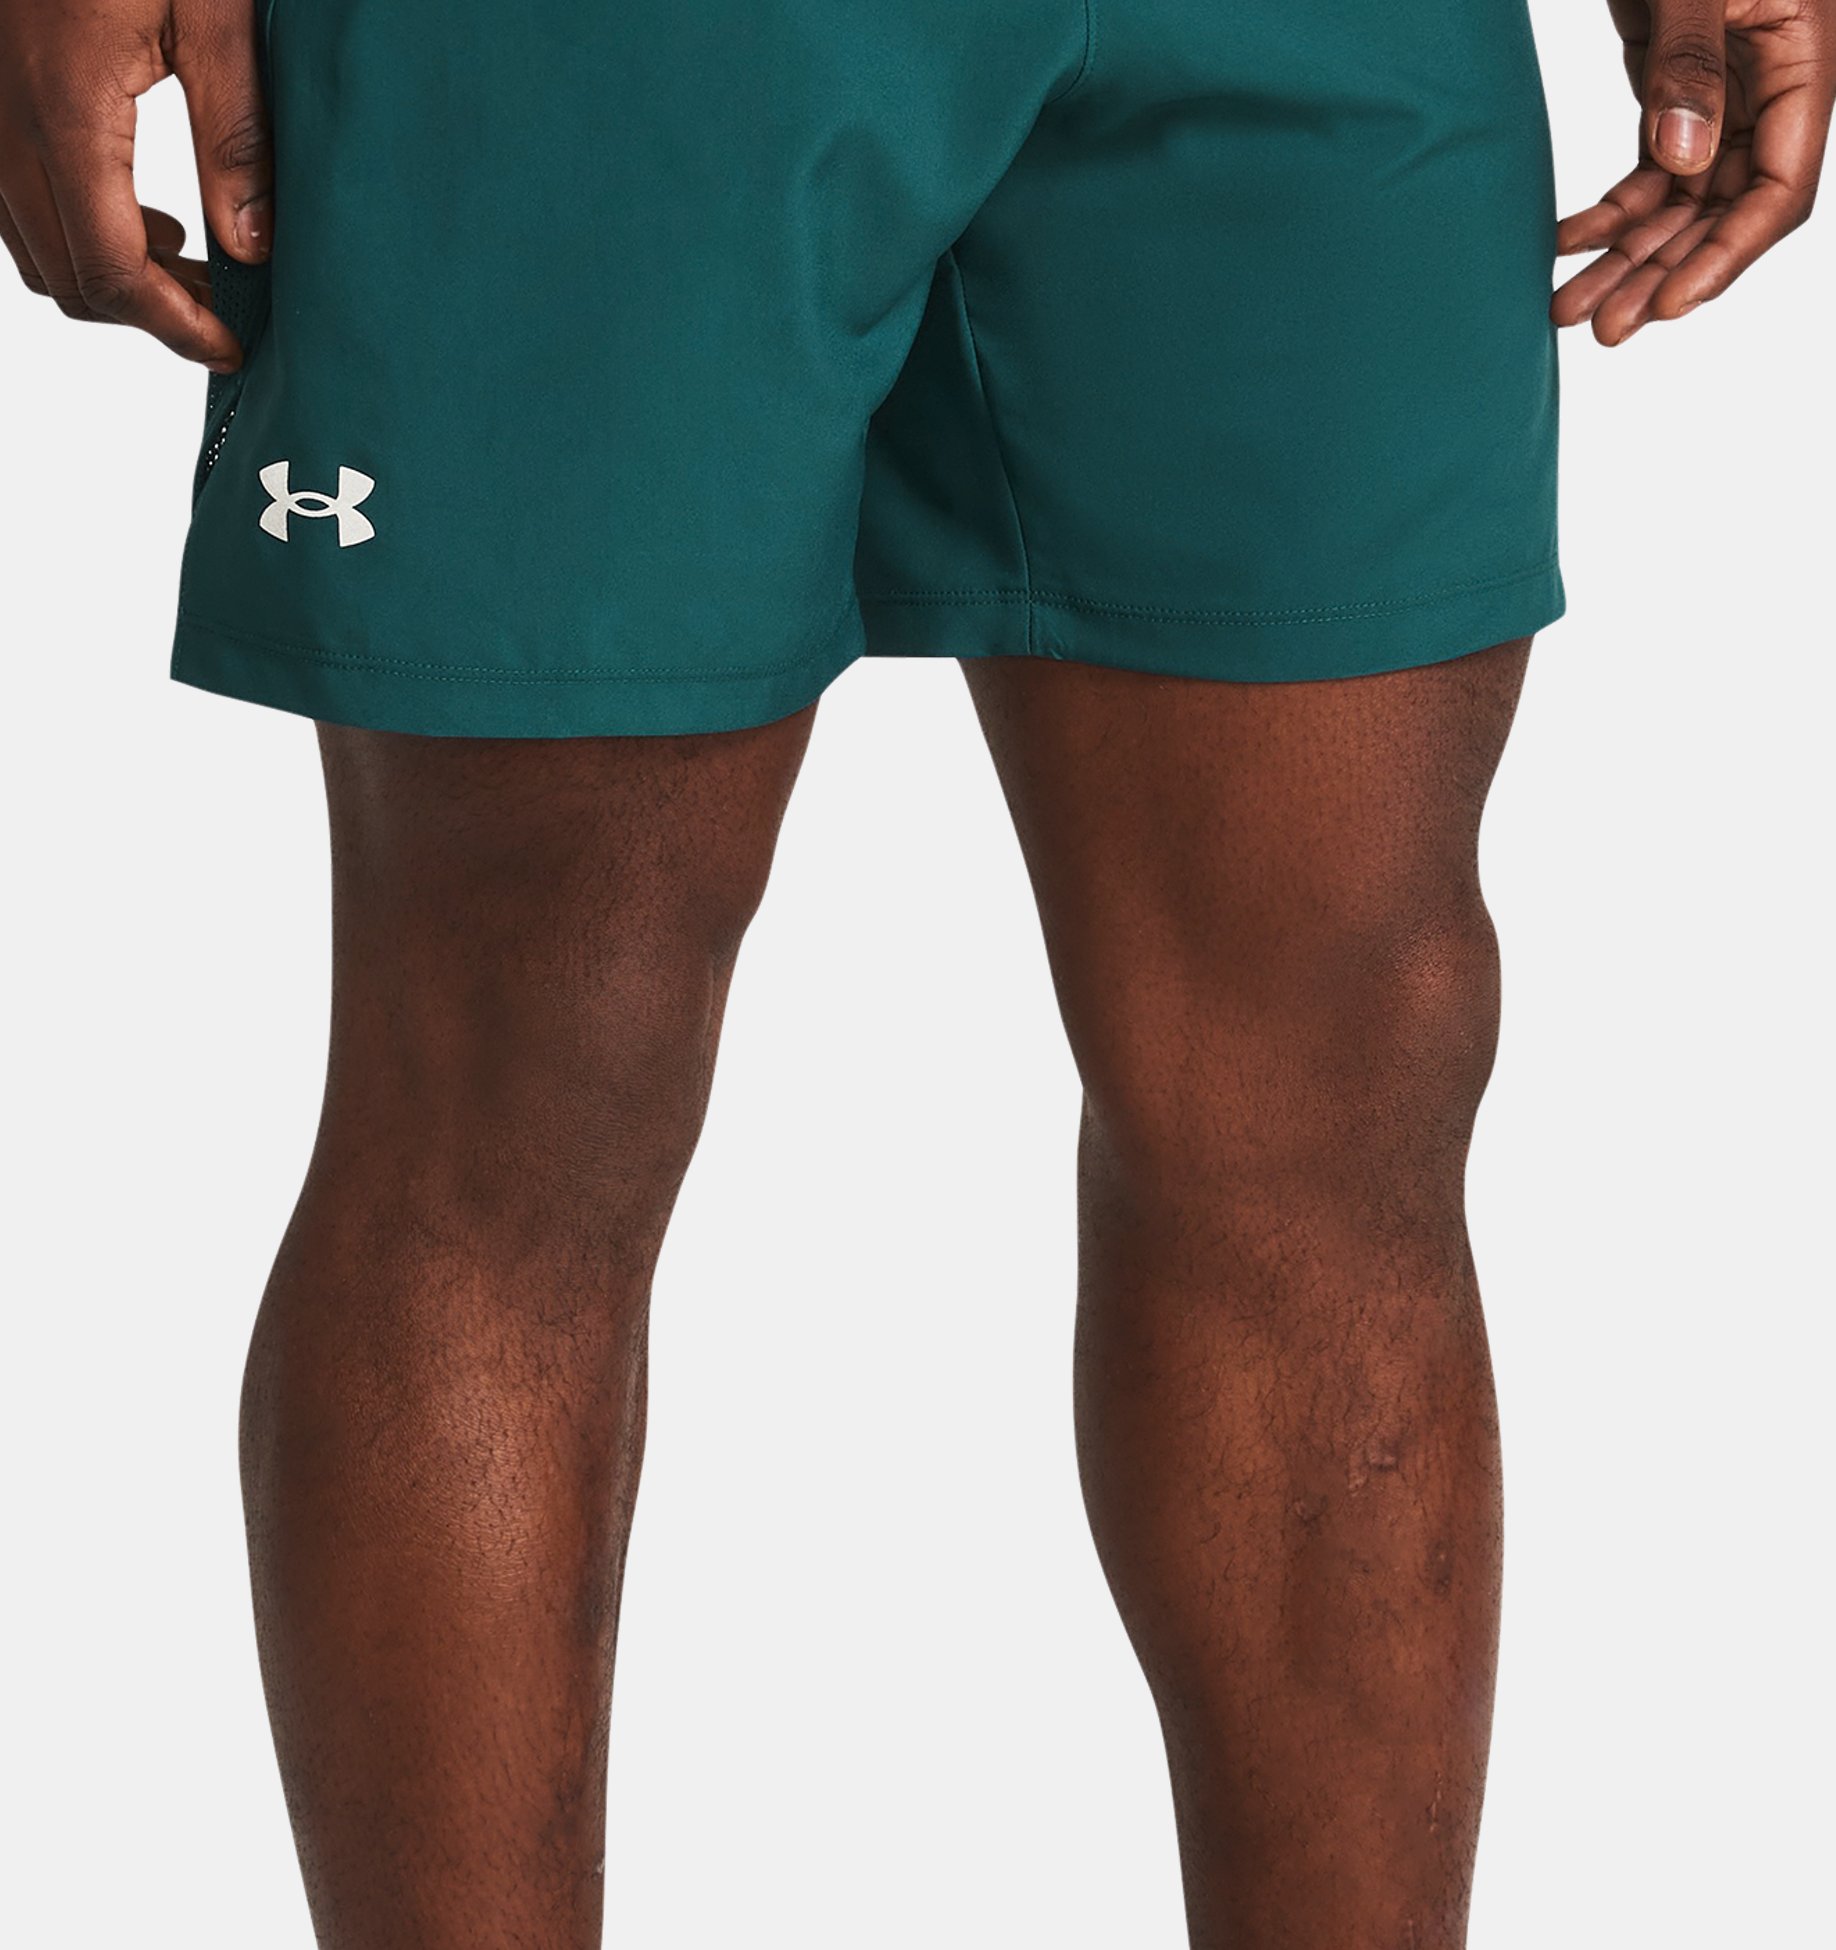 Under Armour Launch 5 Running Short Stealth Grey 1274512-008 - Free  Shipping at LASC